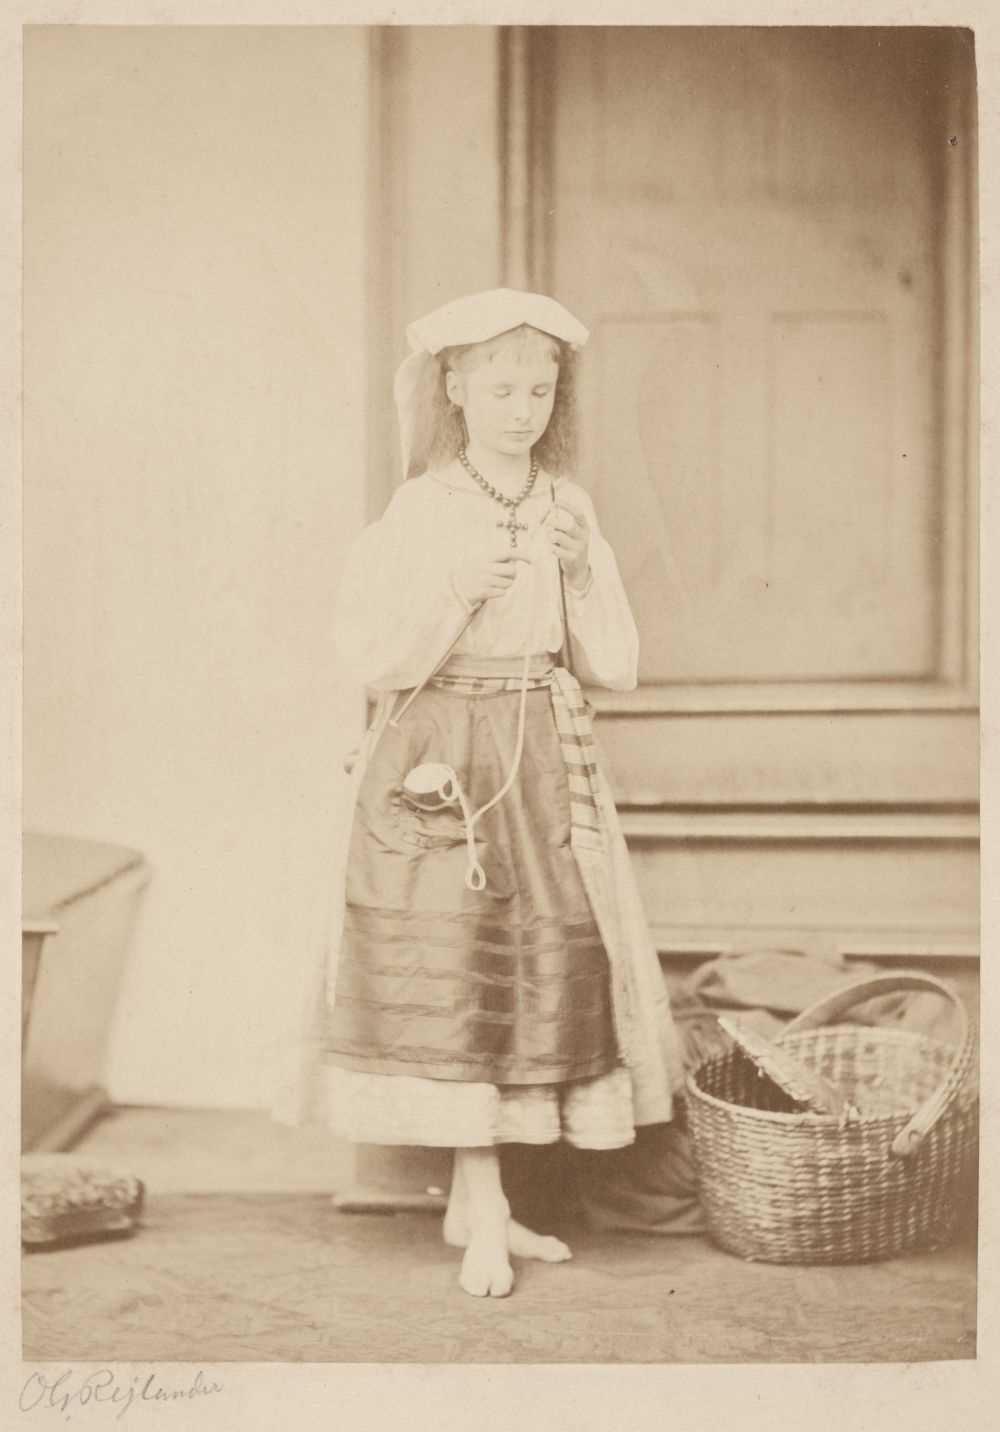 Lot 25 - Rejlander (Oscar Gustave, 1813-1875). Study of a young barefoot girl knitting, c. 1860s